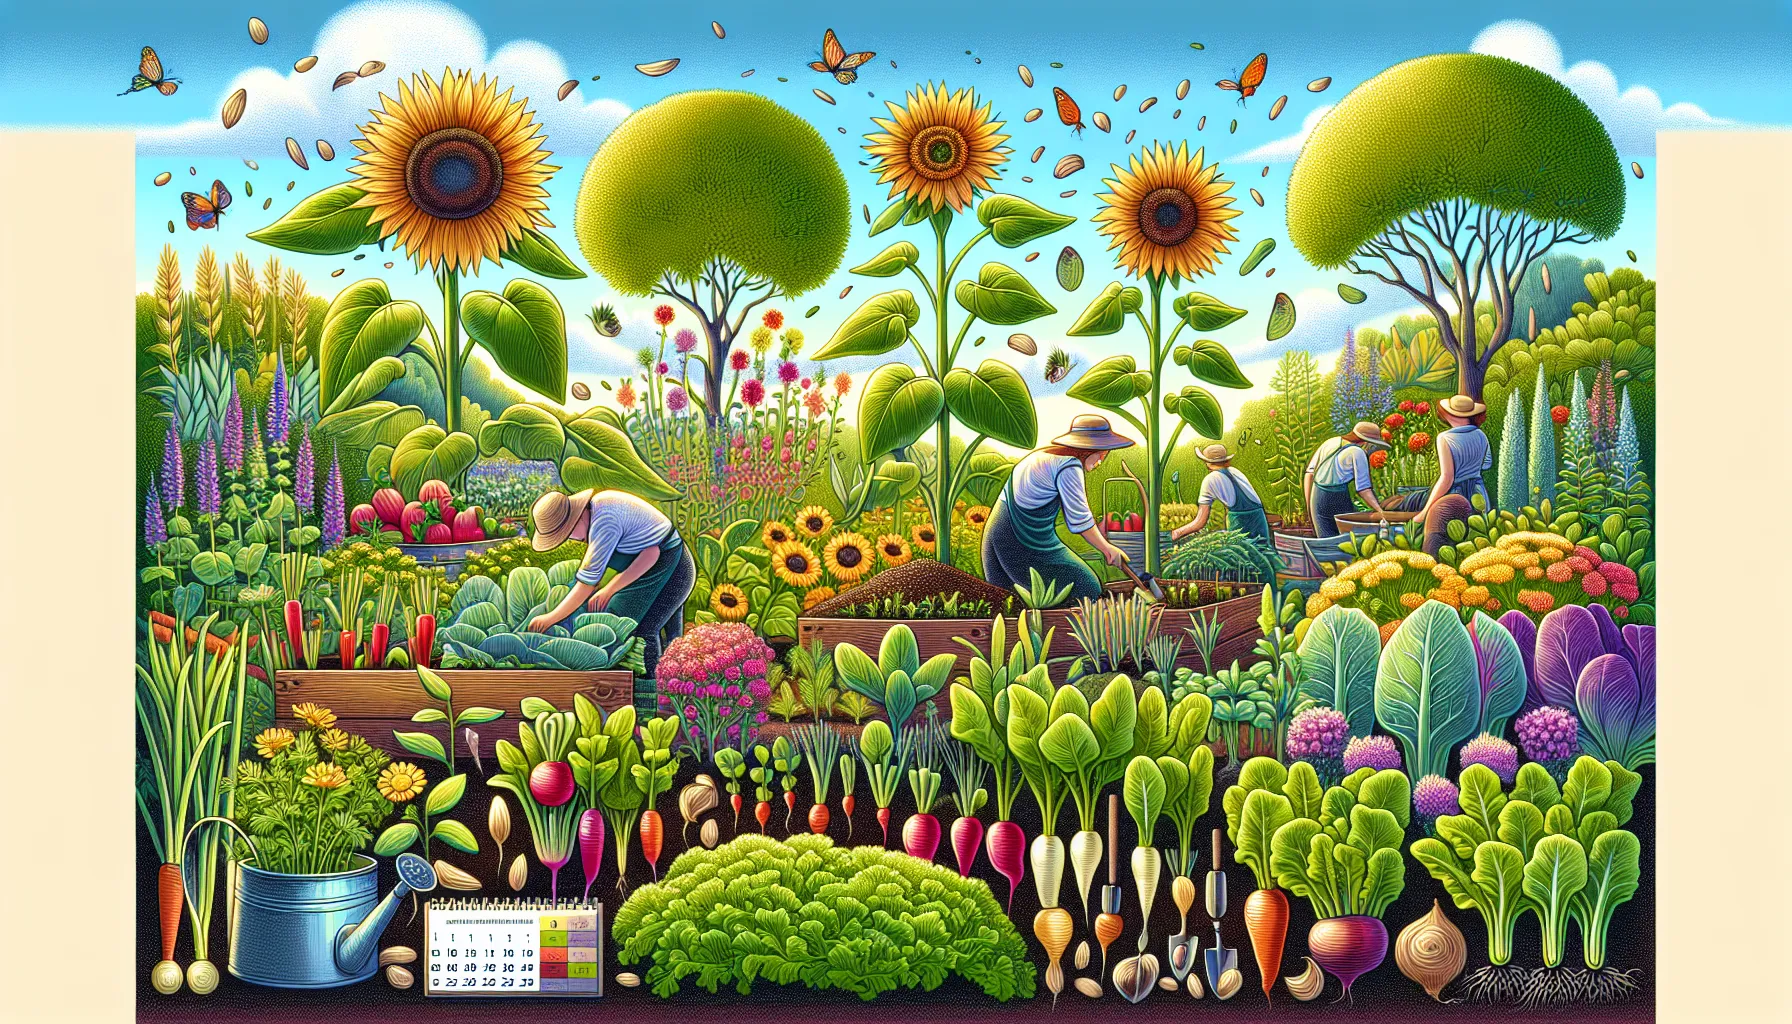 Vibrant illustration of a bustling garden with gardeners at work and oversized fruits, vegetables, and flowers depicting seeds that germinate quickly.